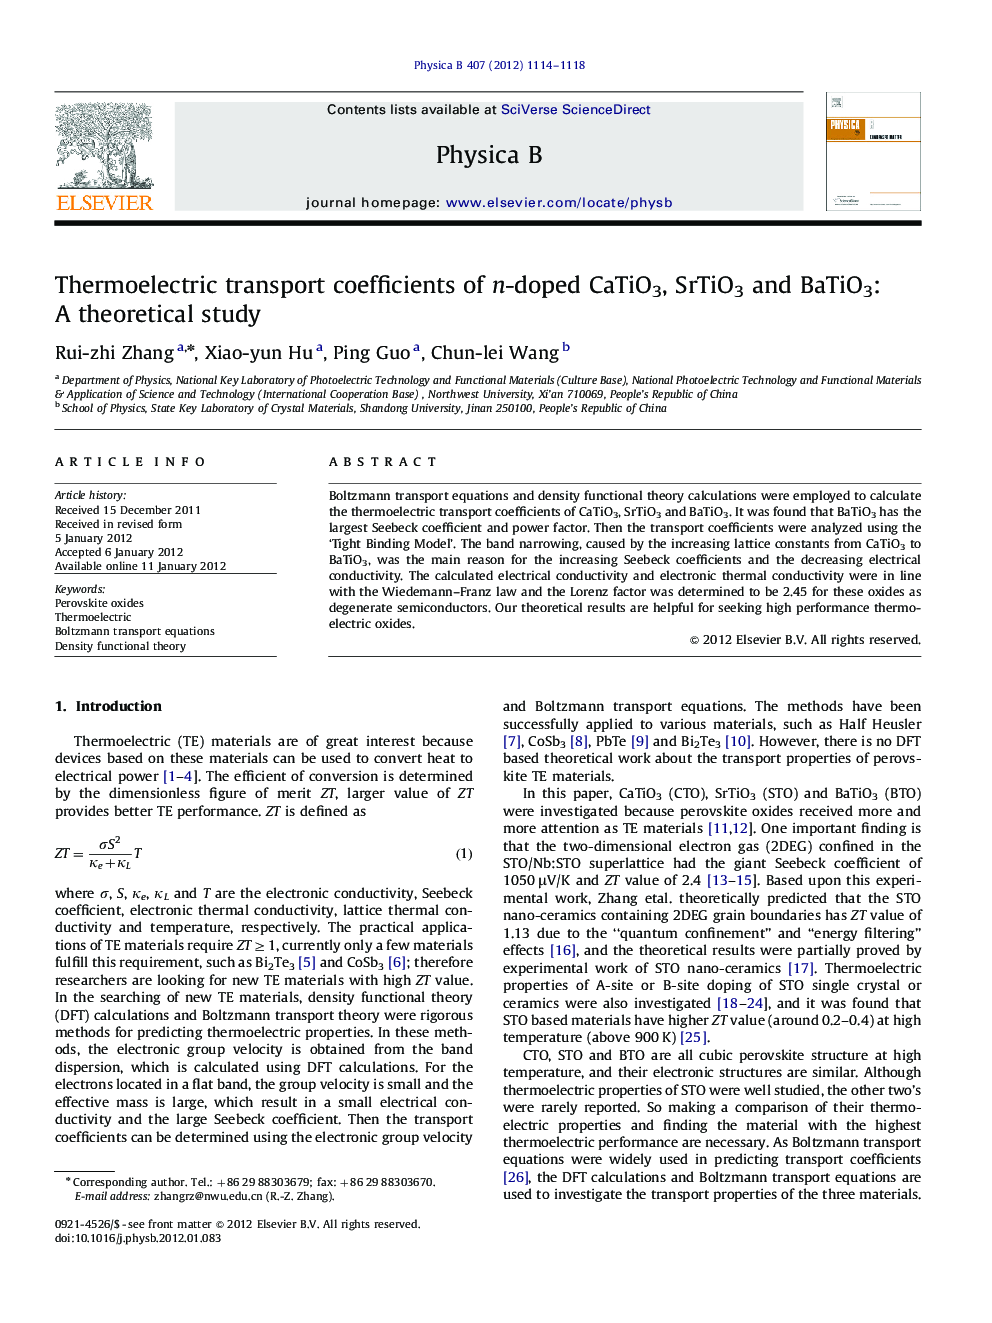 Thermoelectric transport coefficients of n-doped CaTiO3, SrTiO3 and BaTiO3: A theoretical study